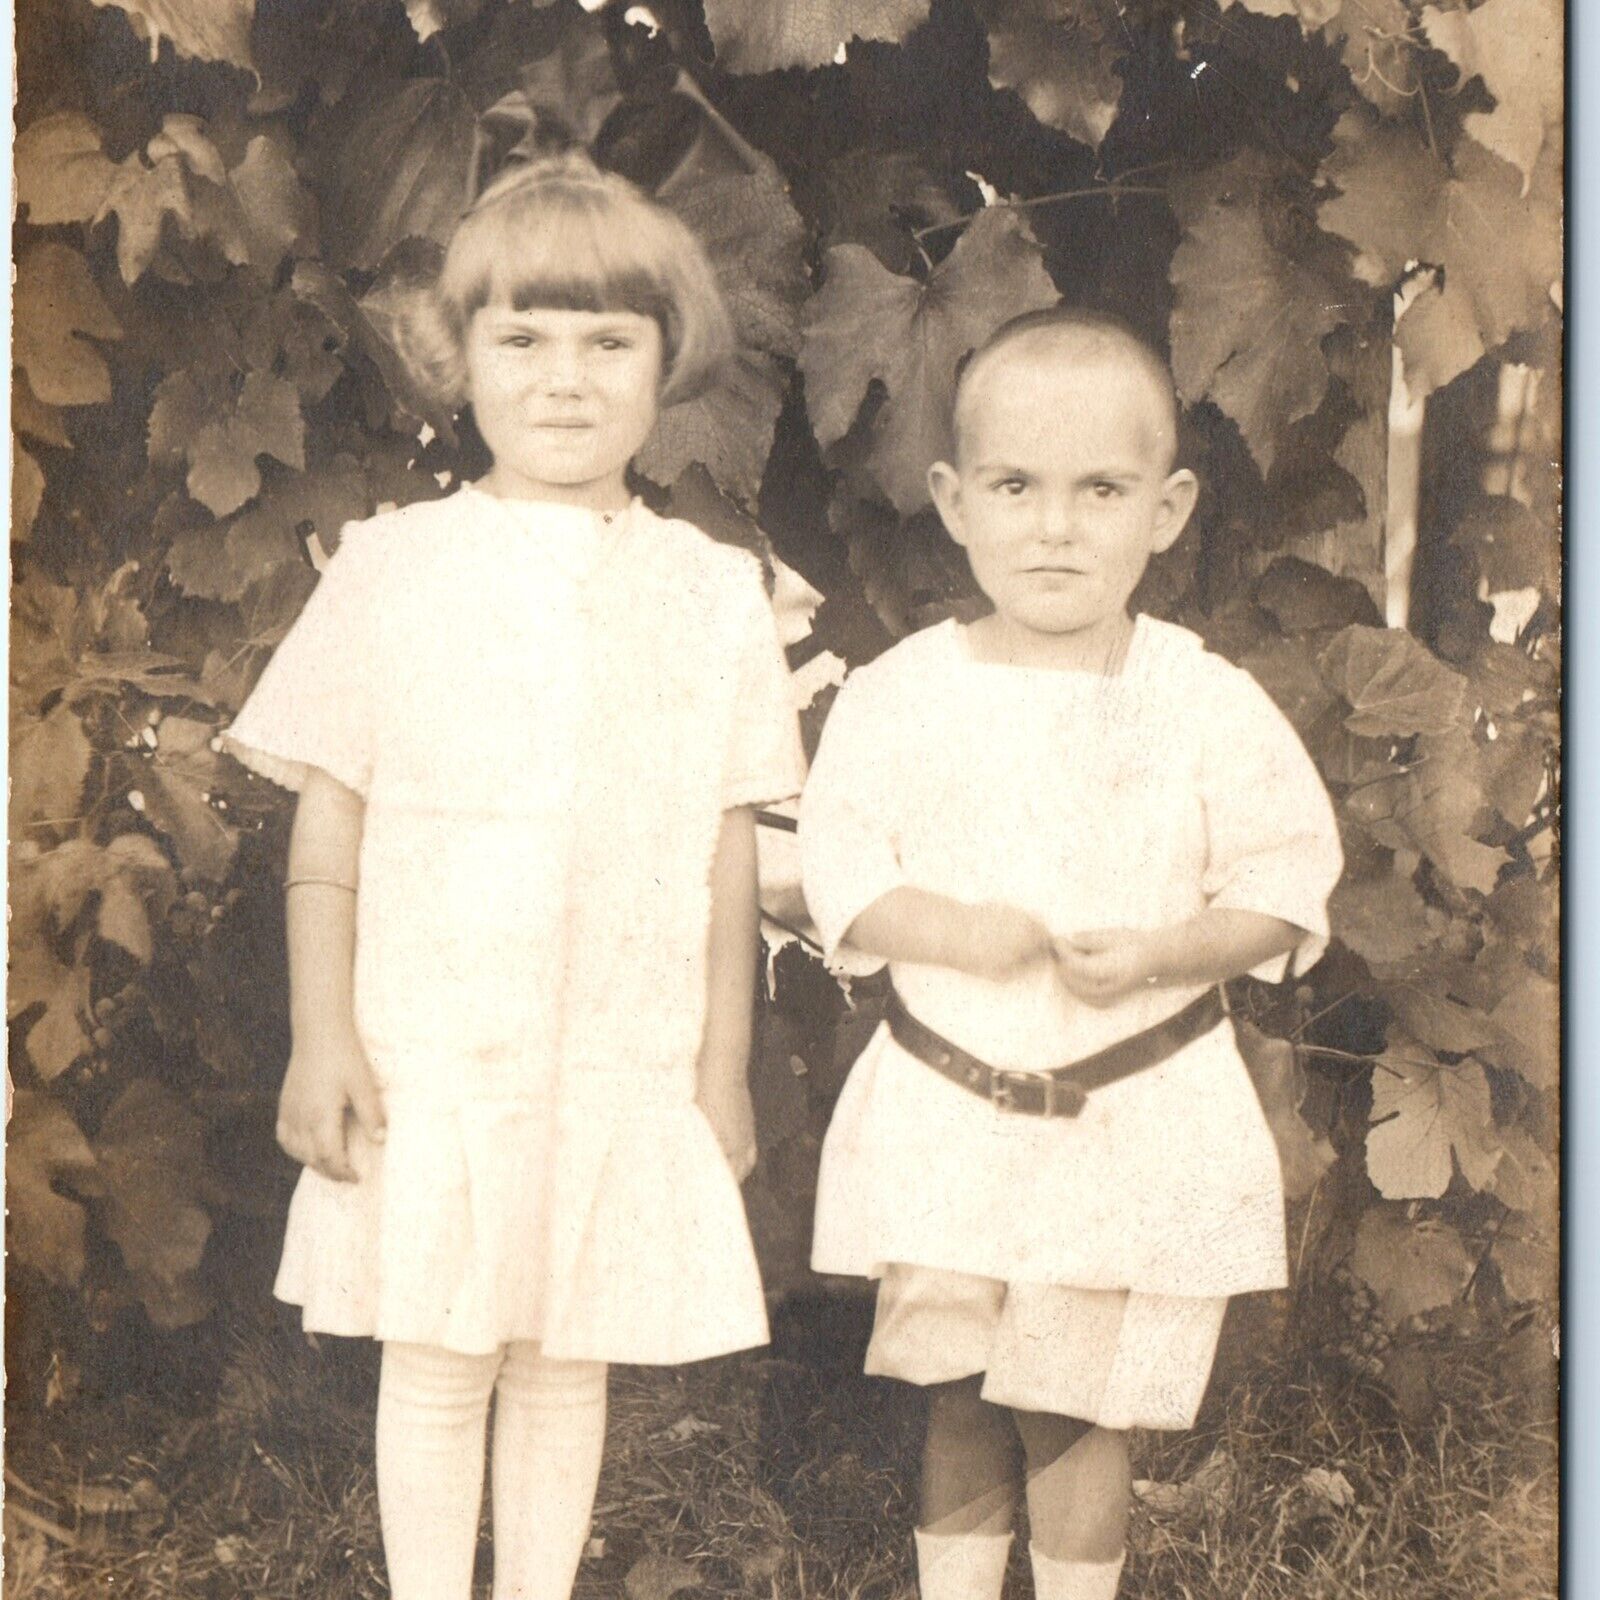 ID'd c1910s Outdoor Kids Boy Girl RPPC Real Photo Lillie Molly & Louis Hays A142